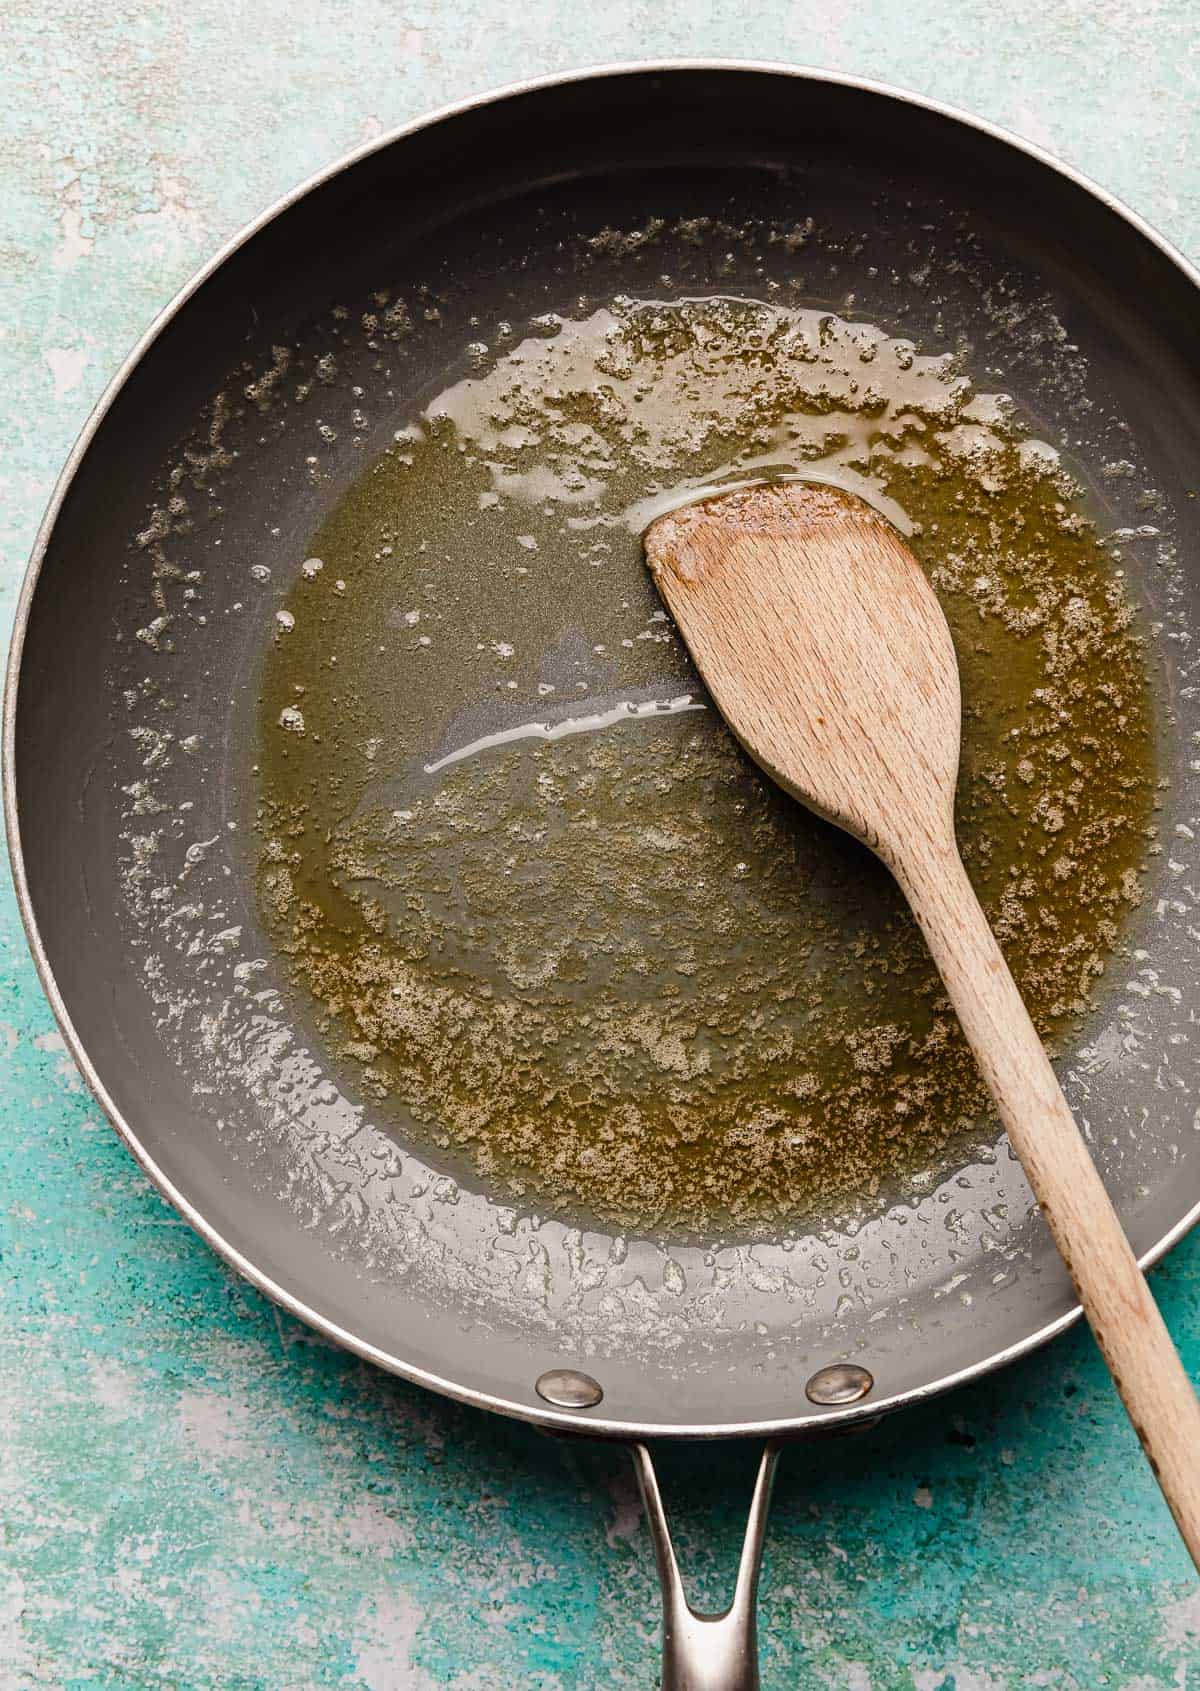 Melted butter and honey in a gray skillet on a turquoise blue background.